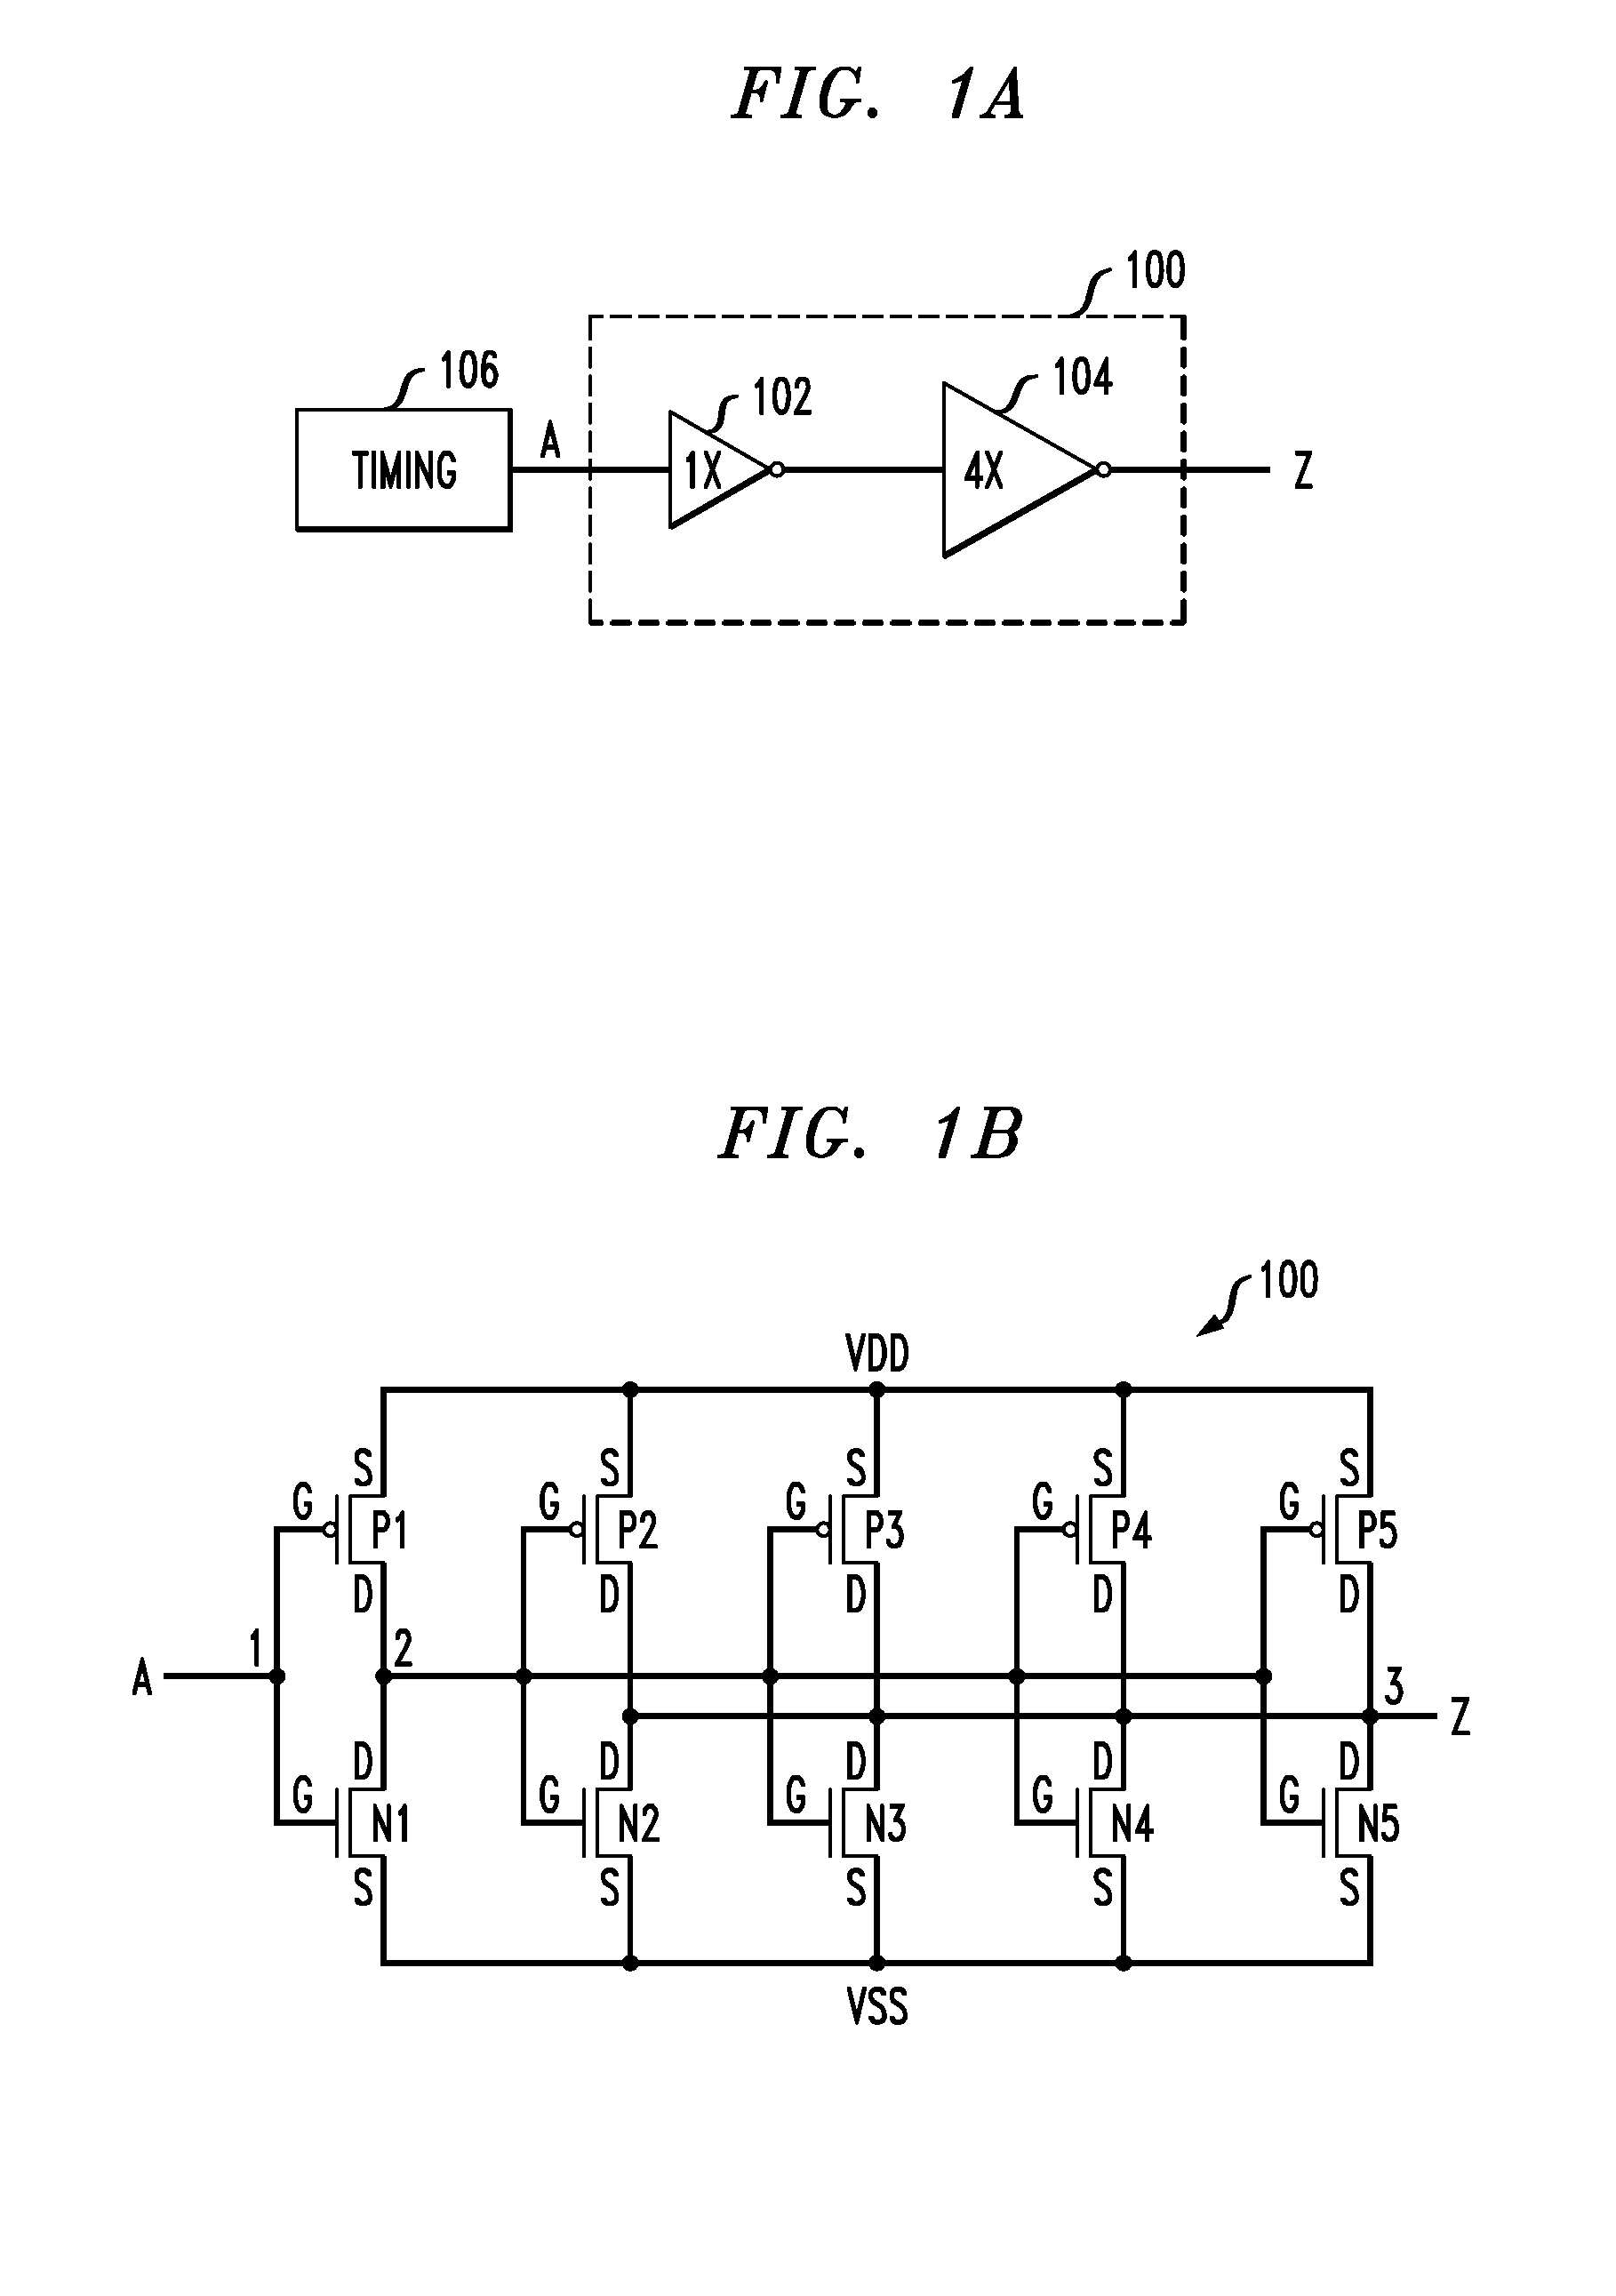 Fine-grained Clock Skew Tuning in an Integrated Circuit